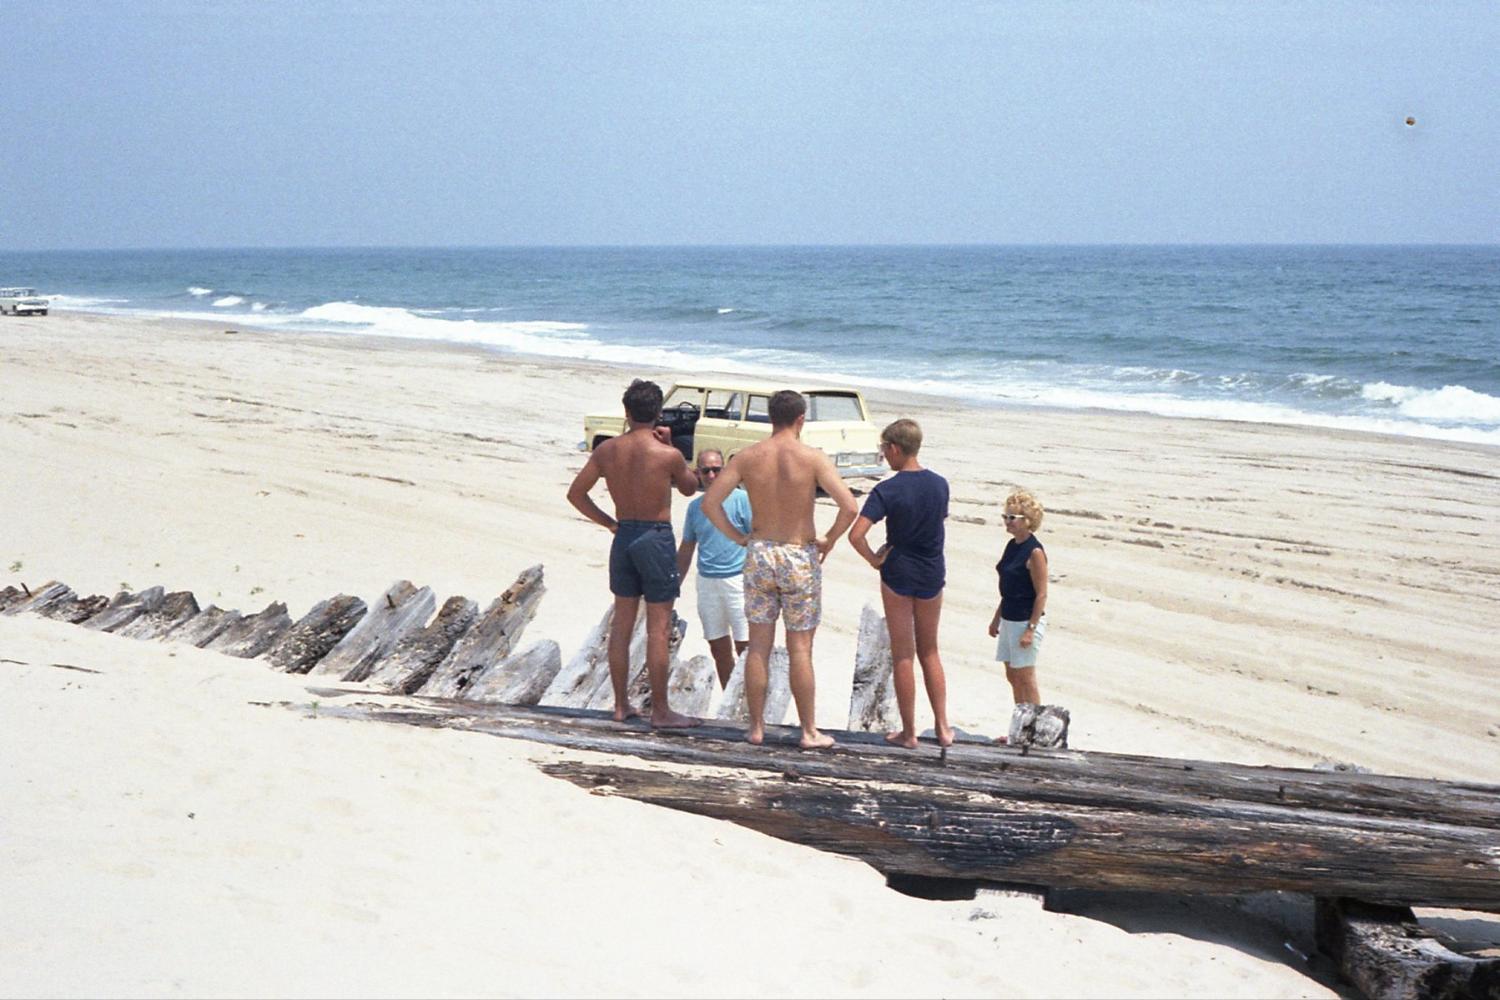 “Outer Banks Visionaries: Building North Carolina’s Oceanfront” by Clark Twiddy